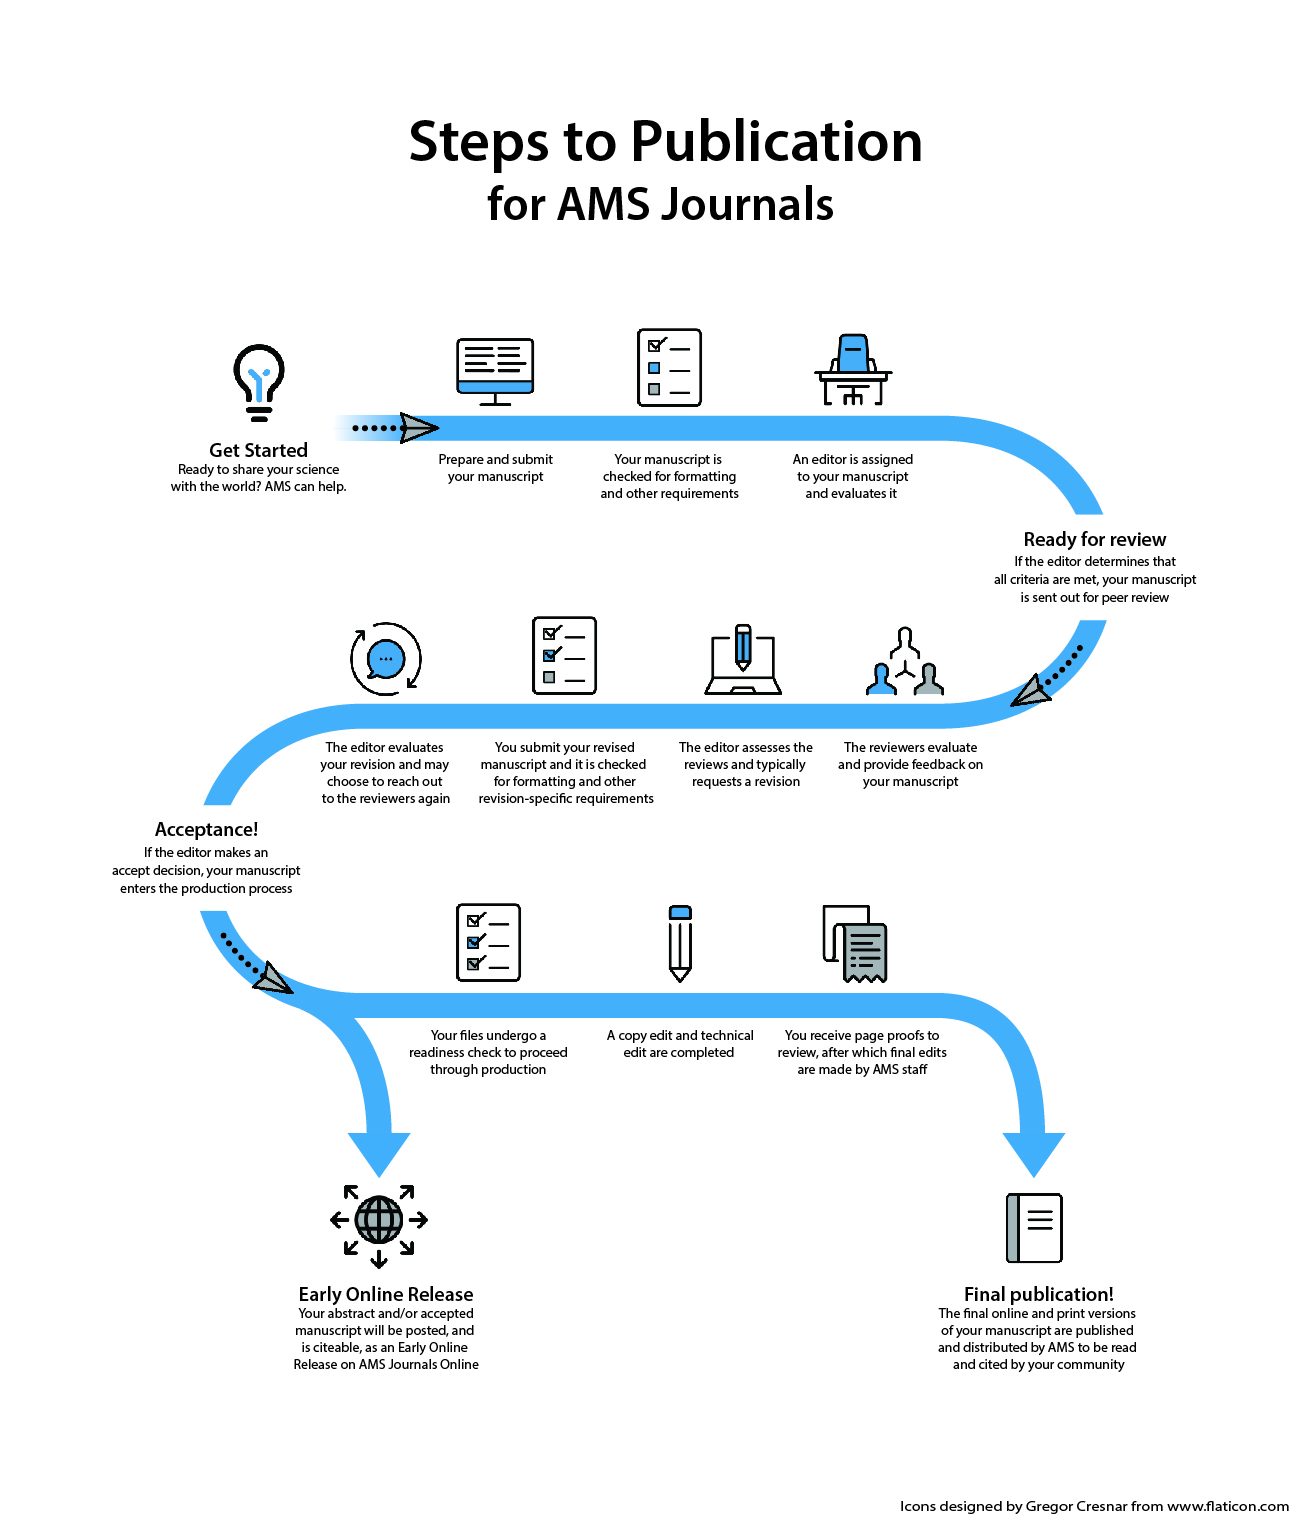 Steps to Publication